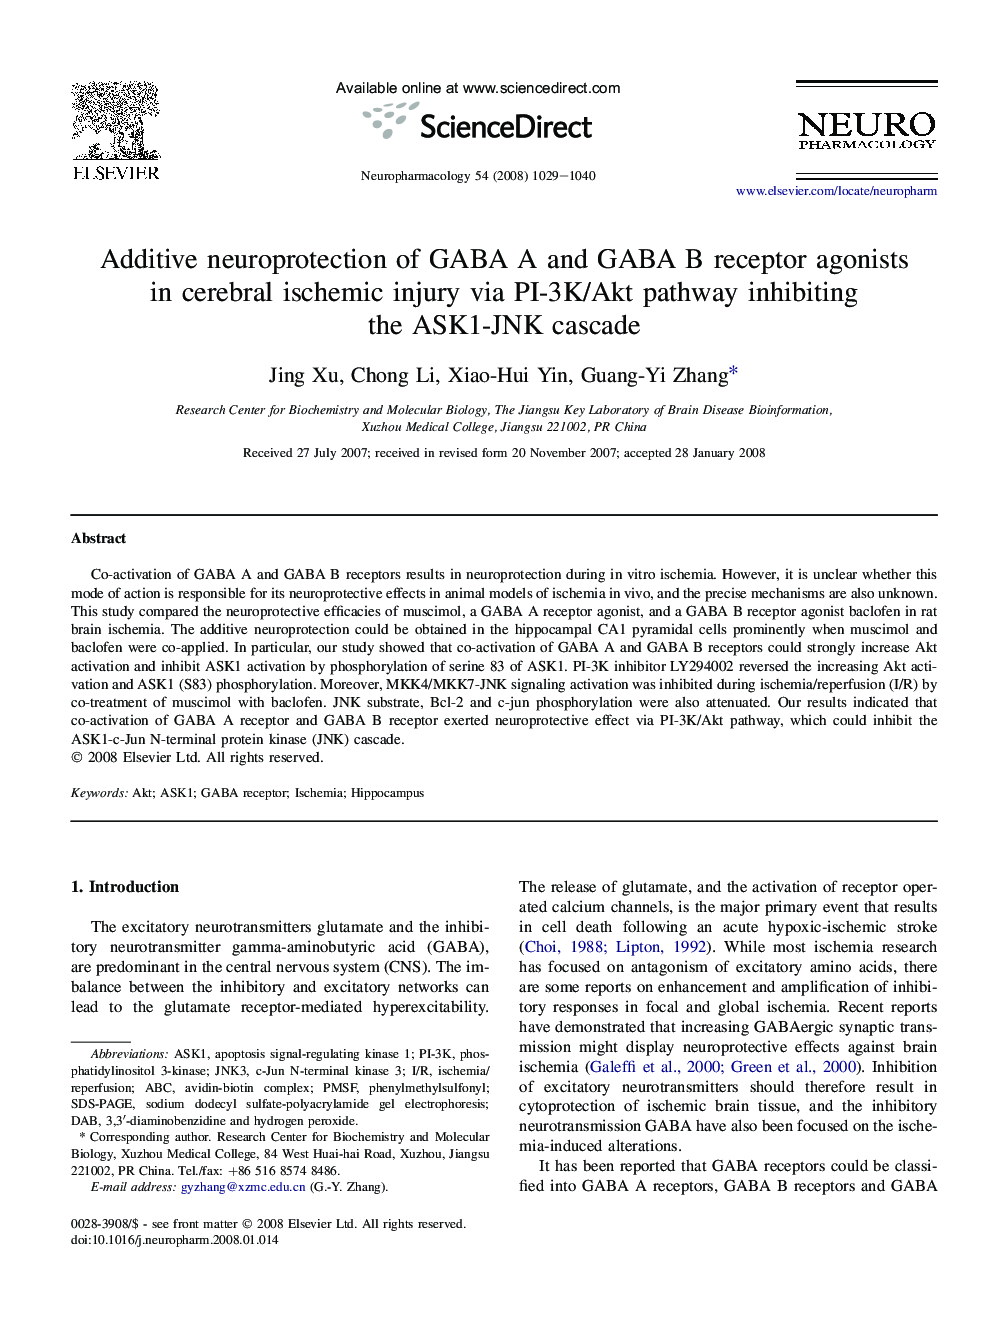 Additive neuroprotection of GABA A and GABA B receptor agonists in cerebral ischemic injury via PI-3K/Akt pathway inhibiting the ASK1-JNK cascade